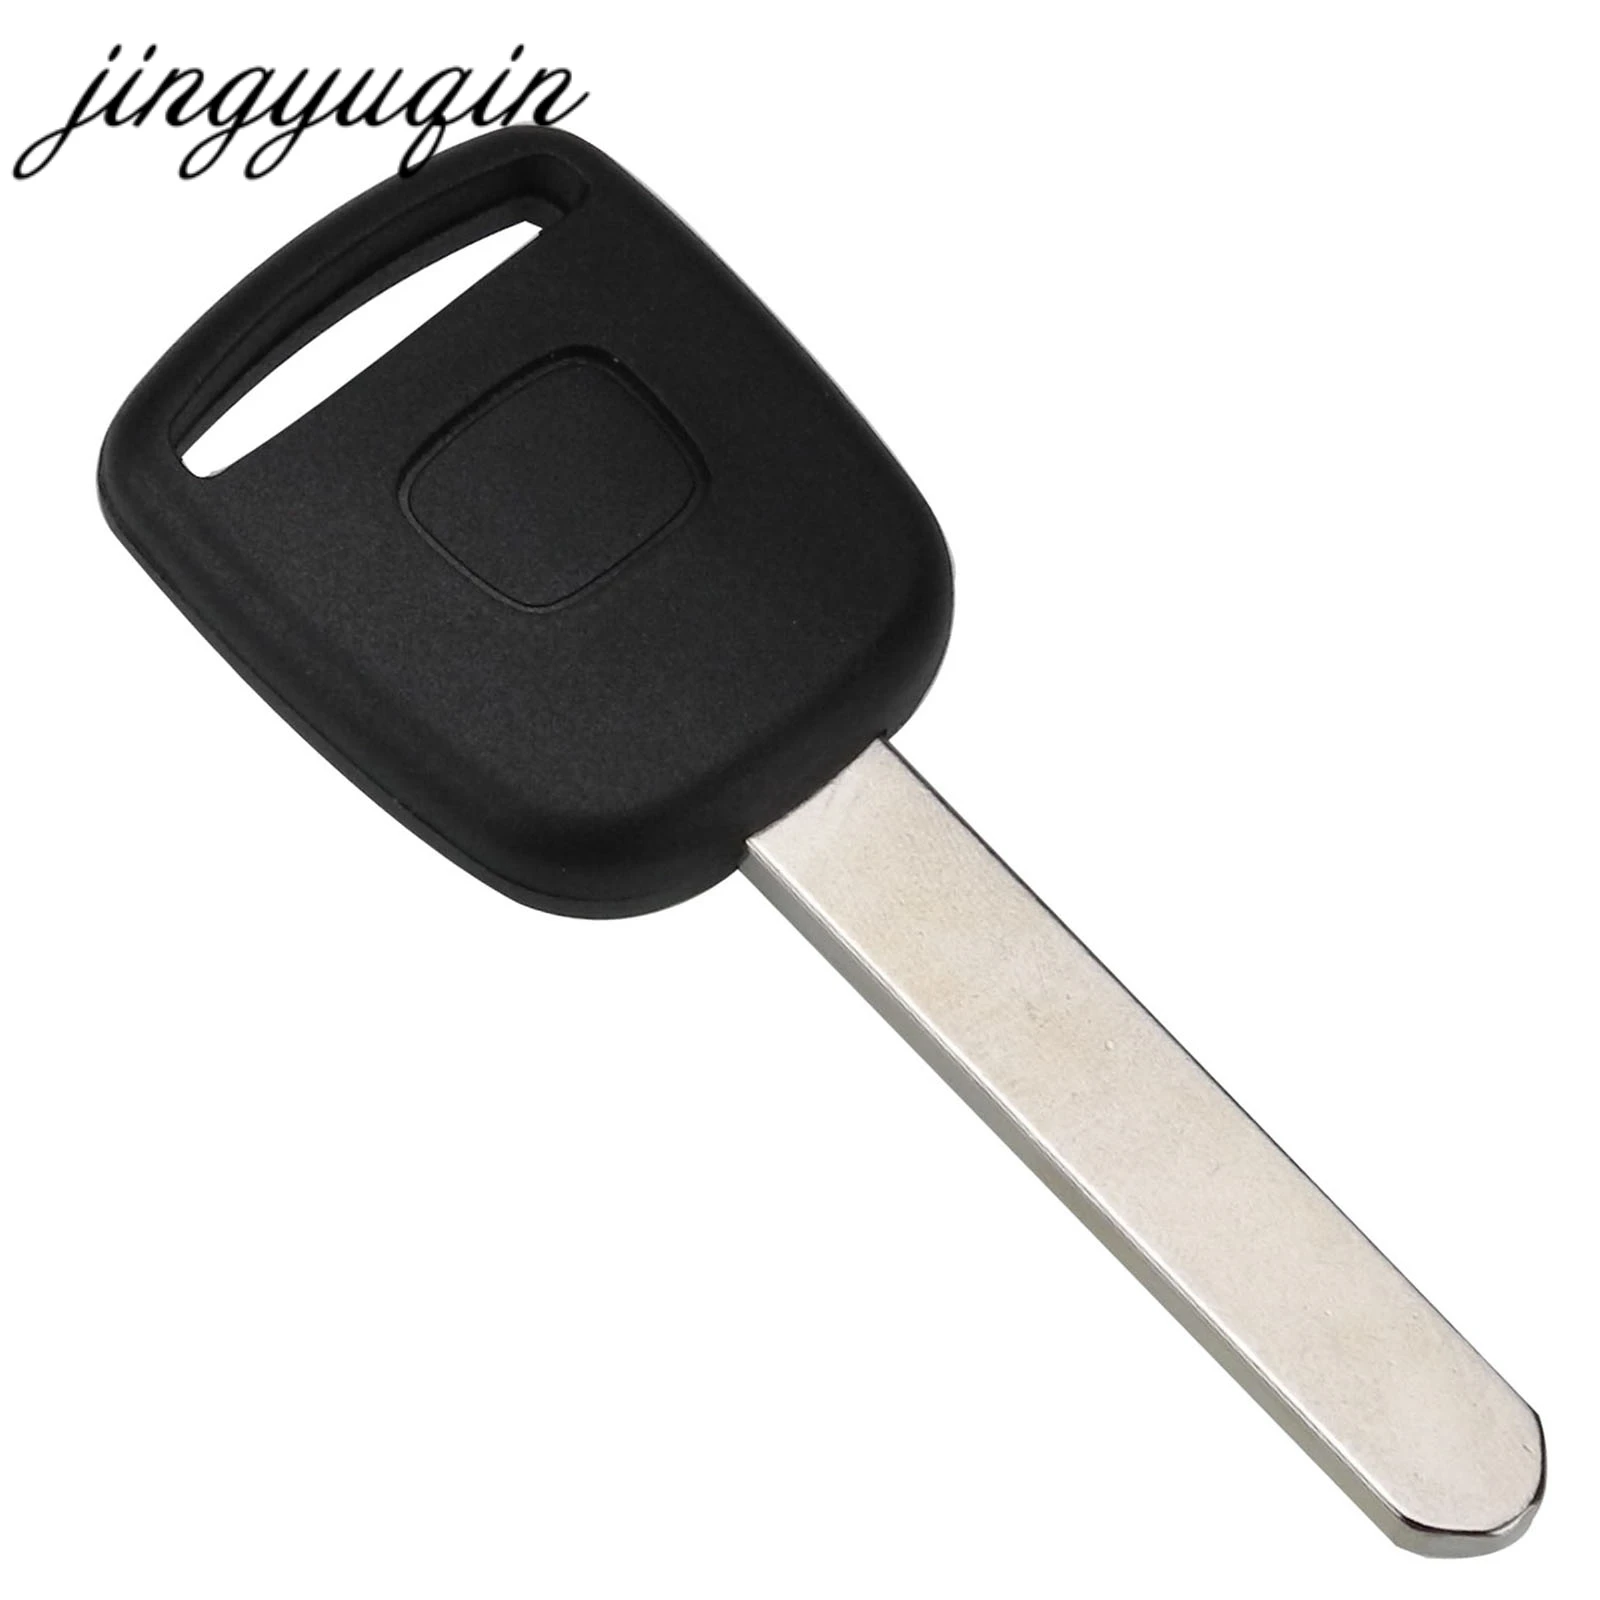 jingyuqin Transponder Ignition Remote Car Key Shell For Honda CR-V XR-V Accord Civic Jade with Chip Groove Key Fob Replacement